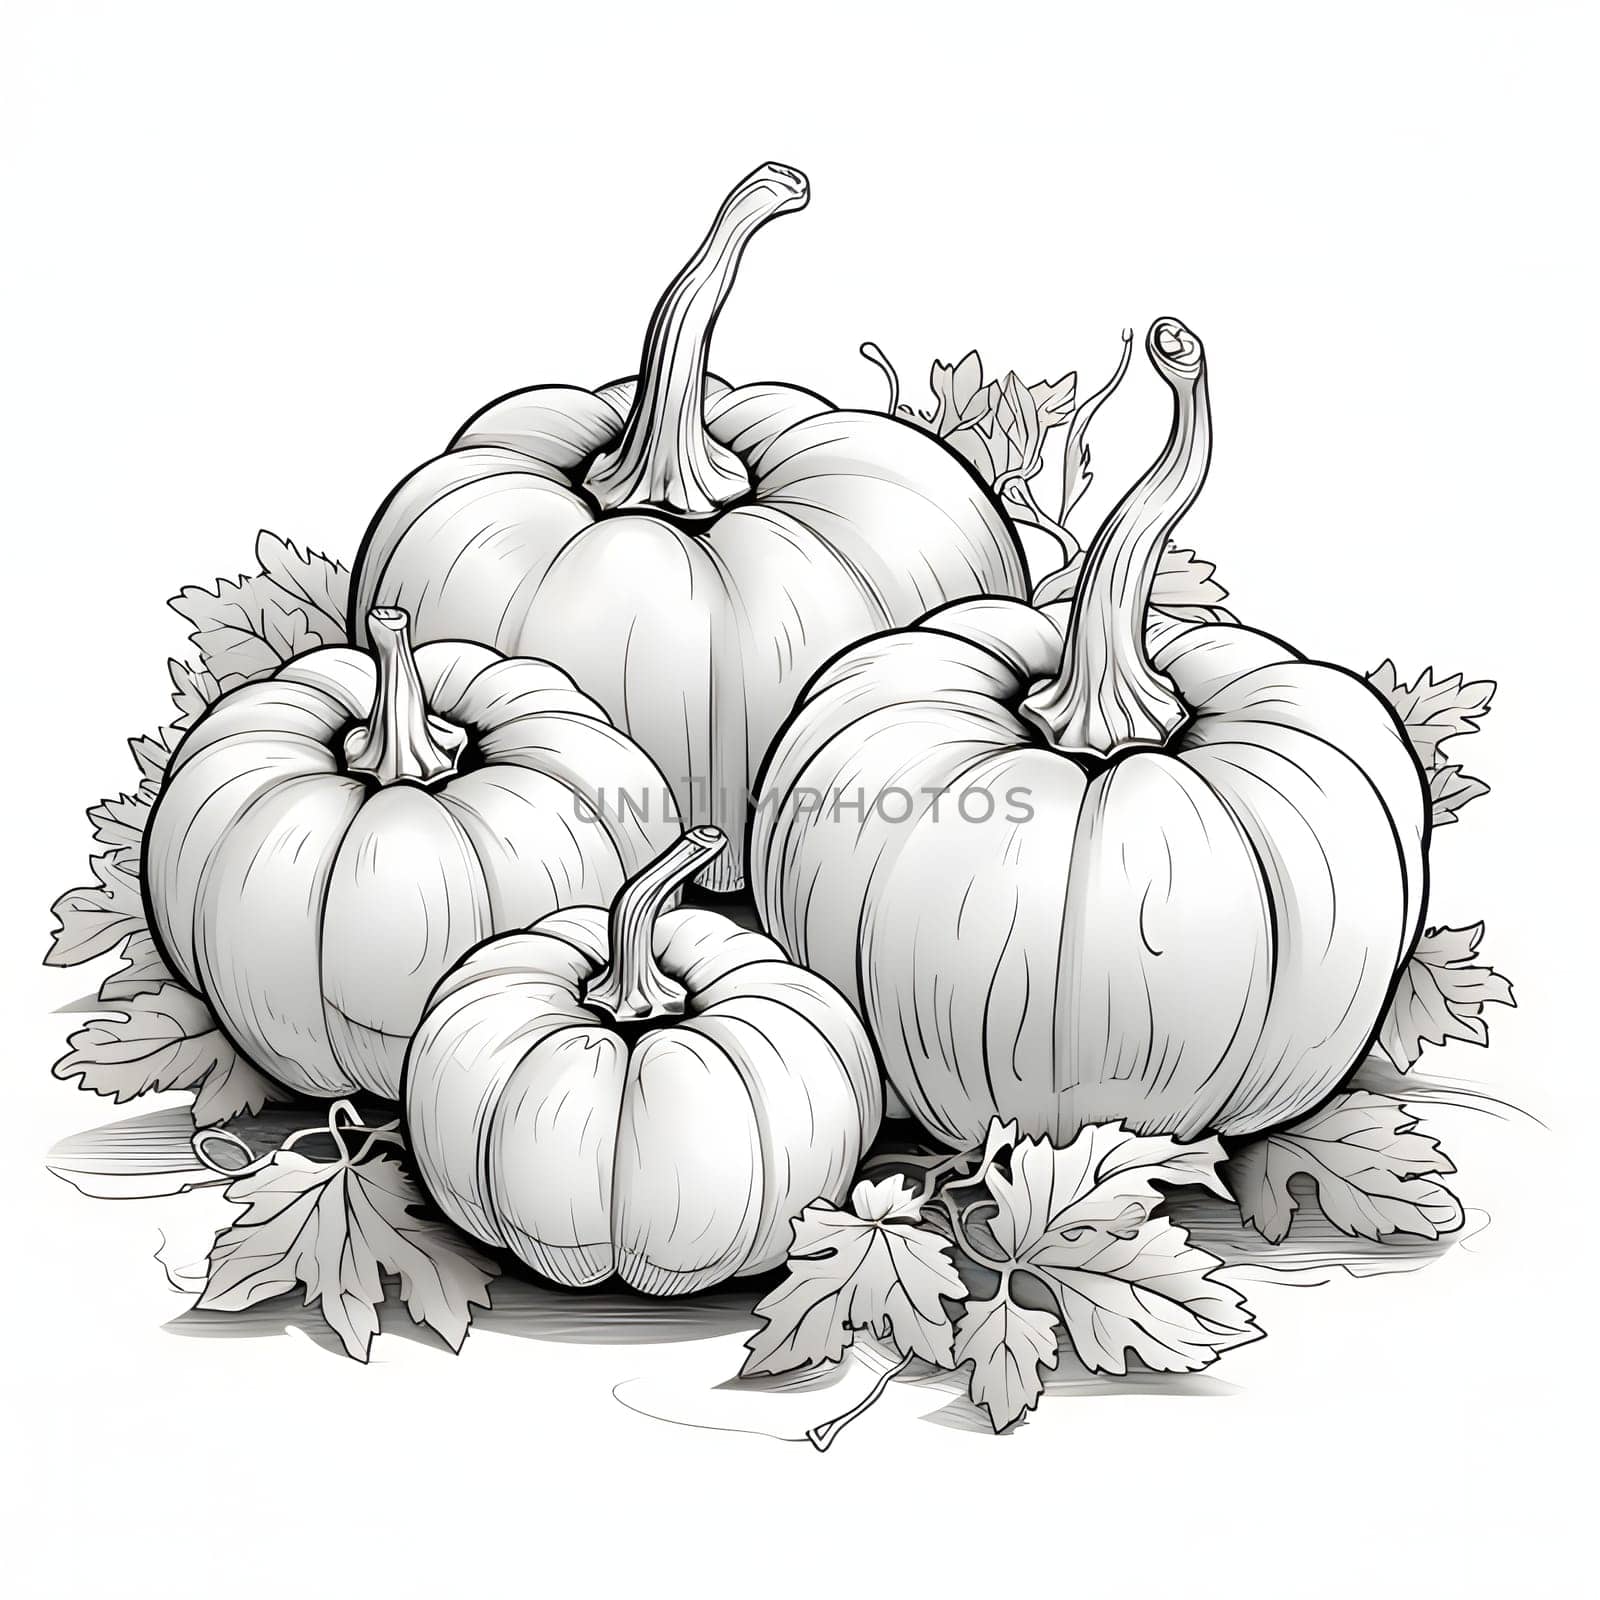 Black and white pumpkins with leaves. Pumpkin as a dish of thanksgiving for the harvest. by ThemesS